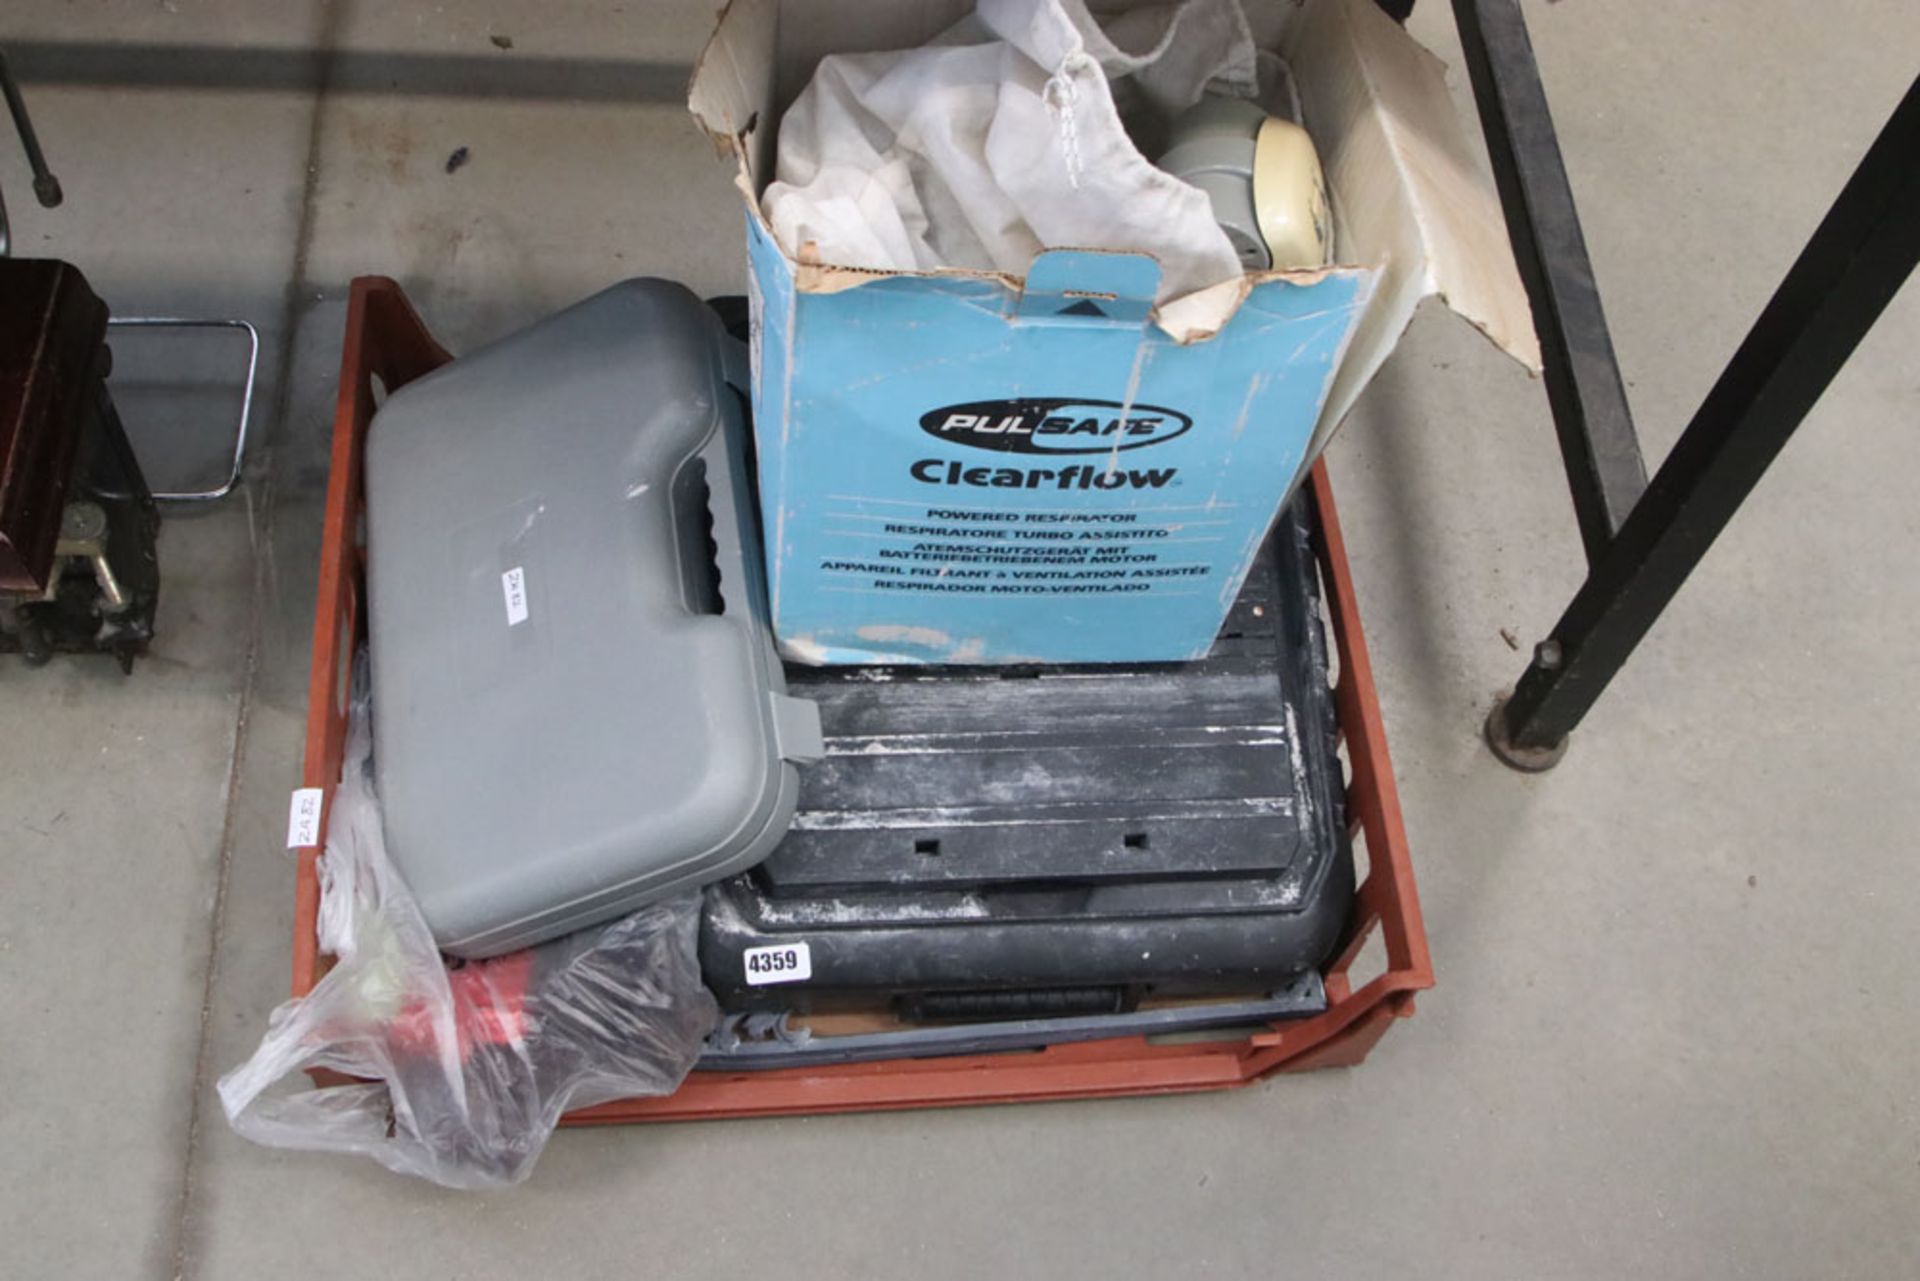 Box containing tile cutter, small pipe bender and respirator